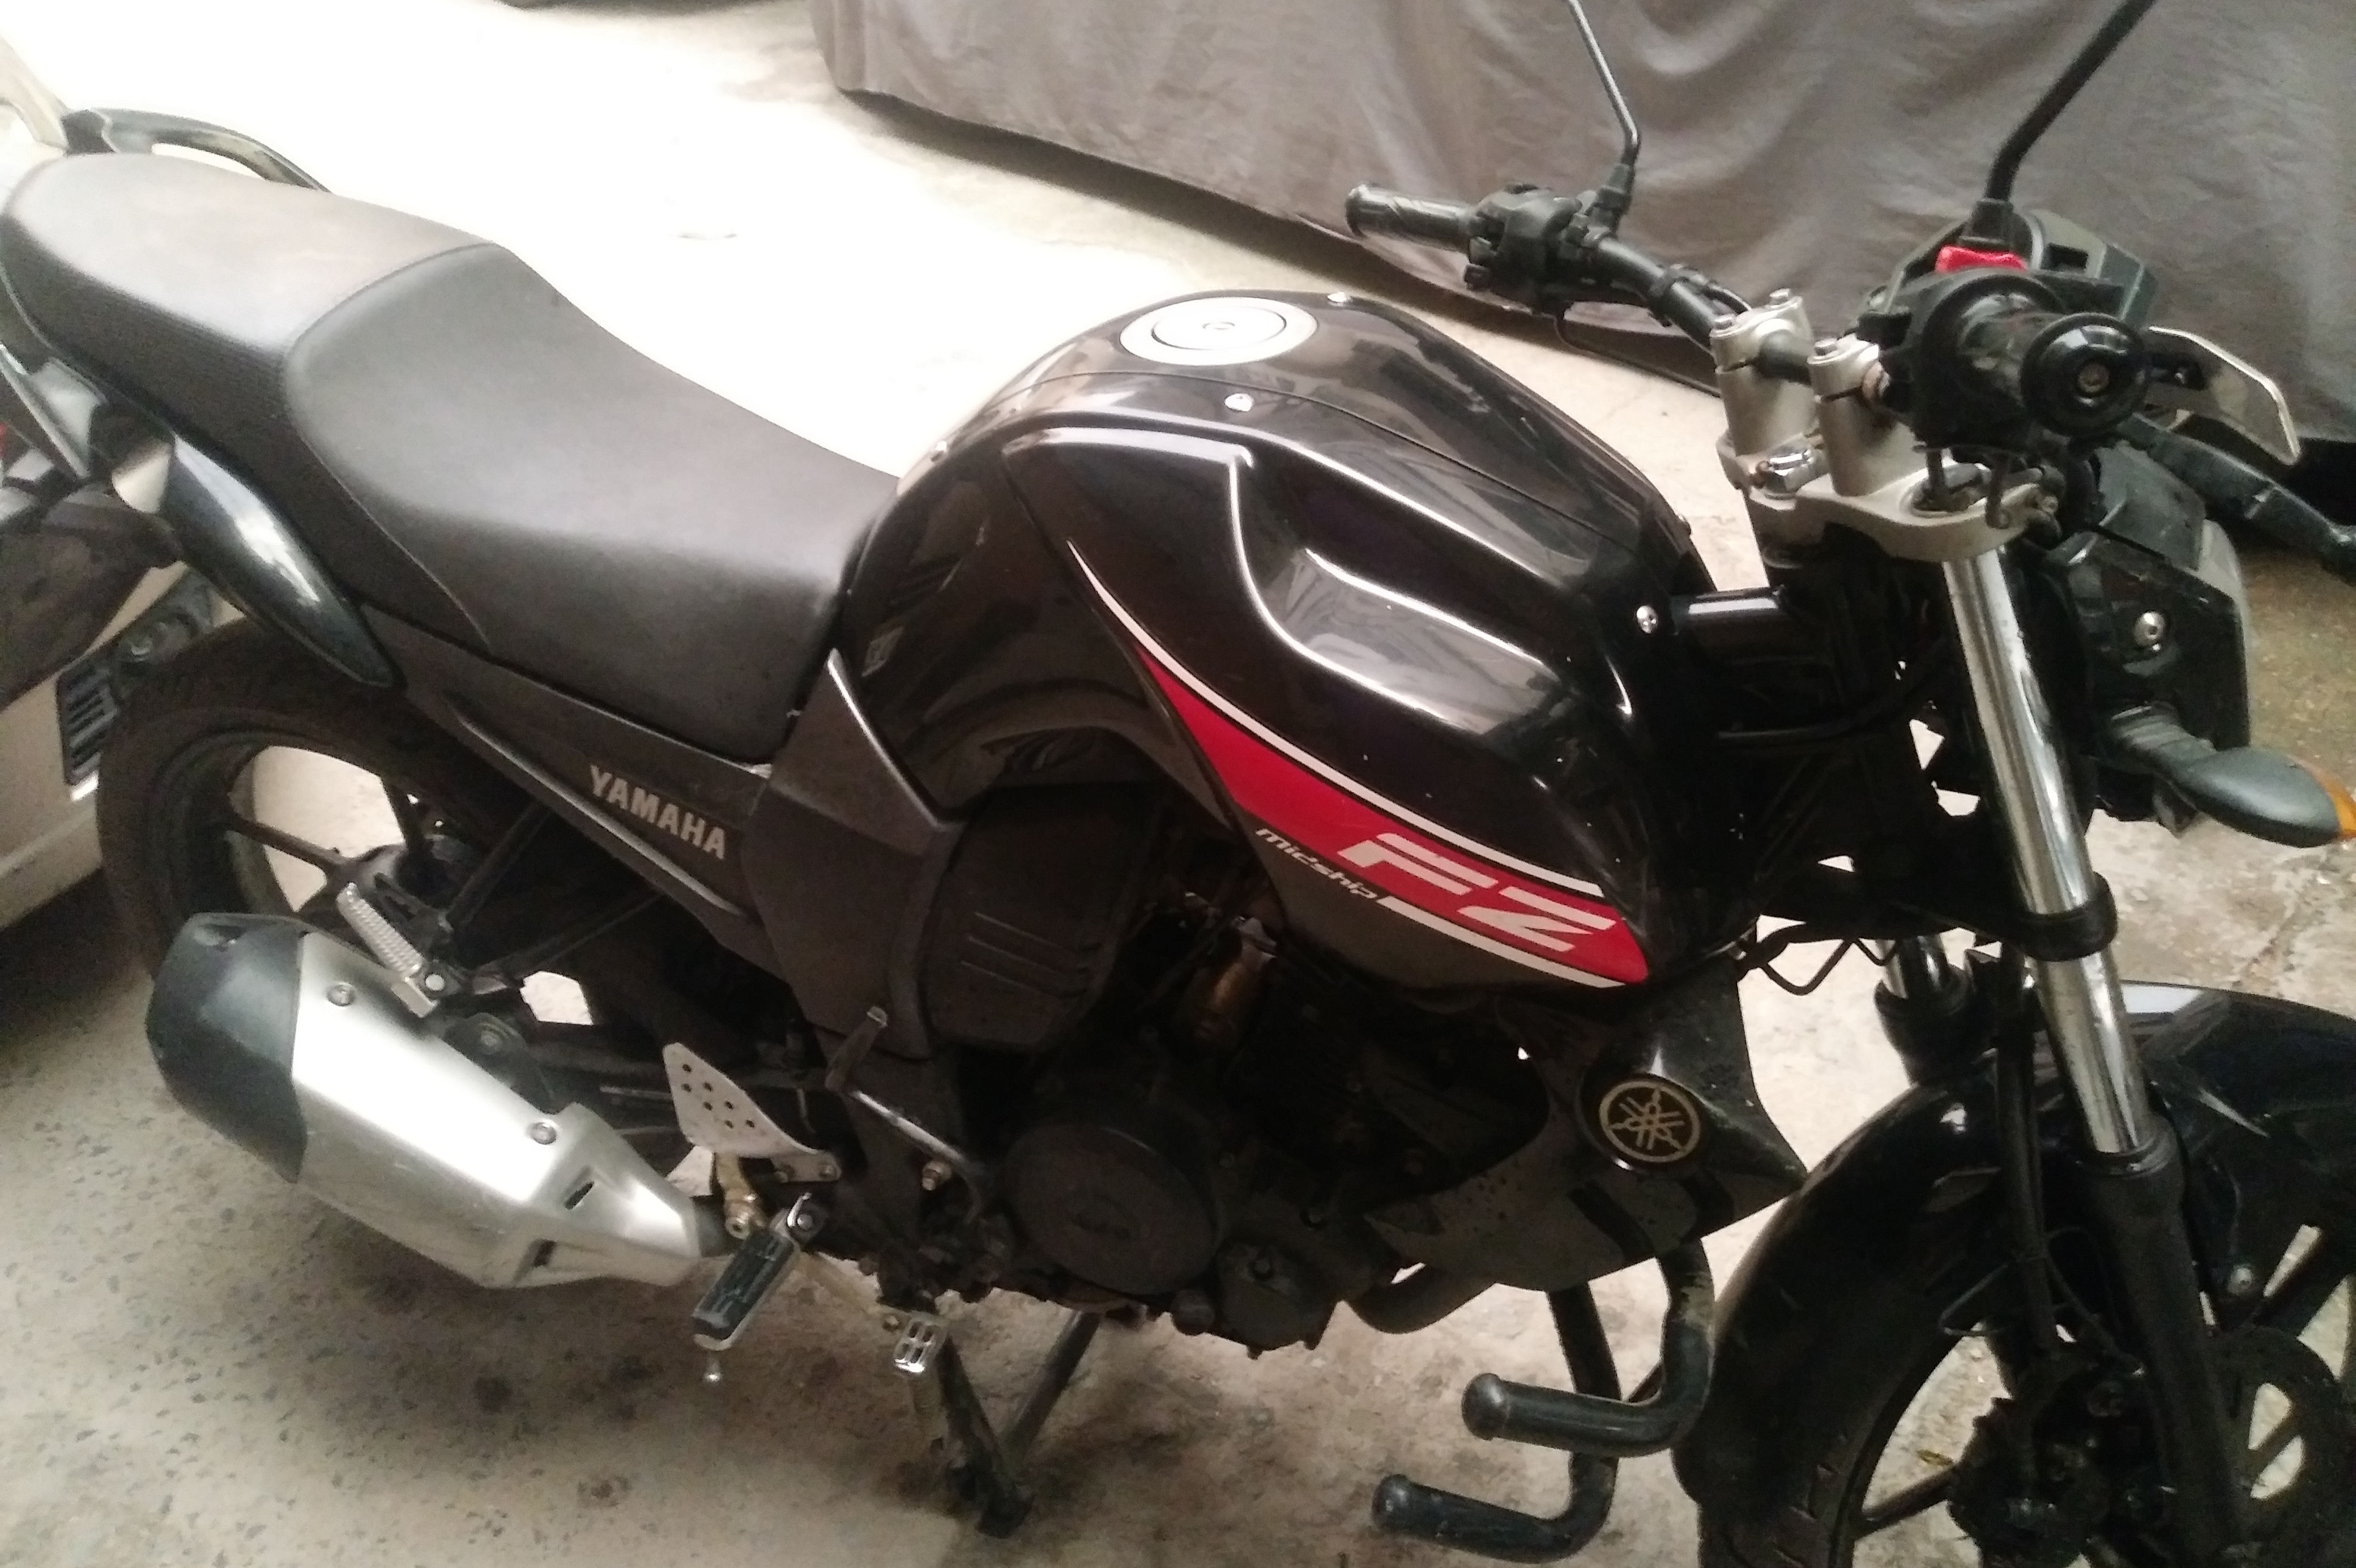 Yamaha Fz16 st, Motorcycles, Motorcycles for Sale, Class 2B on Carousell